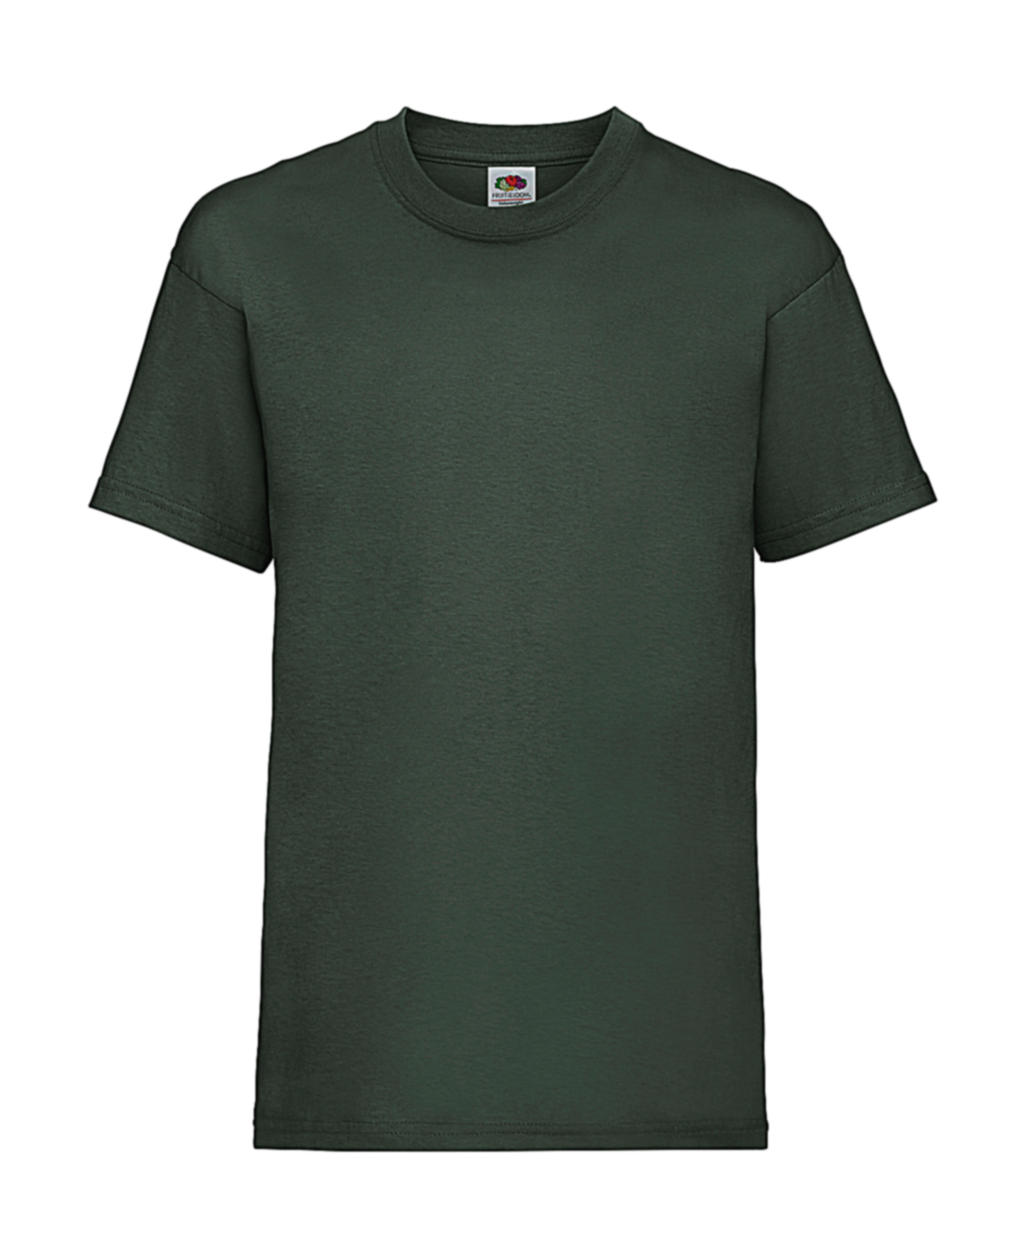  Kids Valueweight T in Farbe Bottle Green